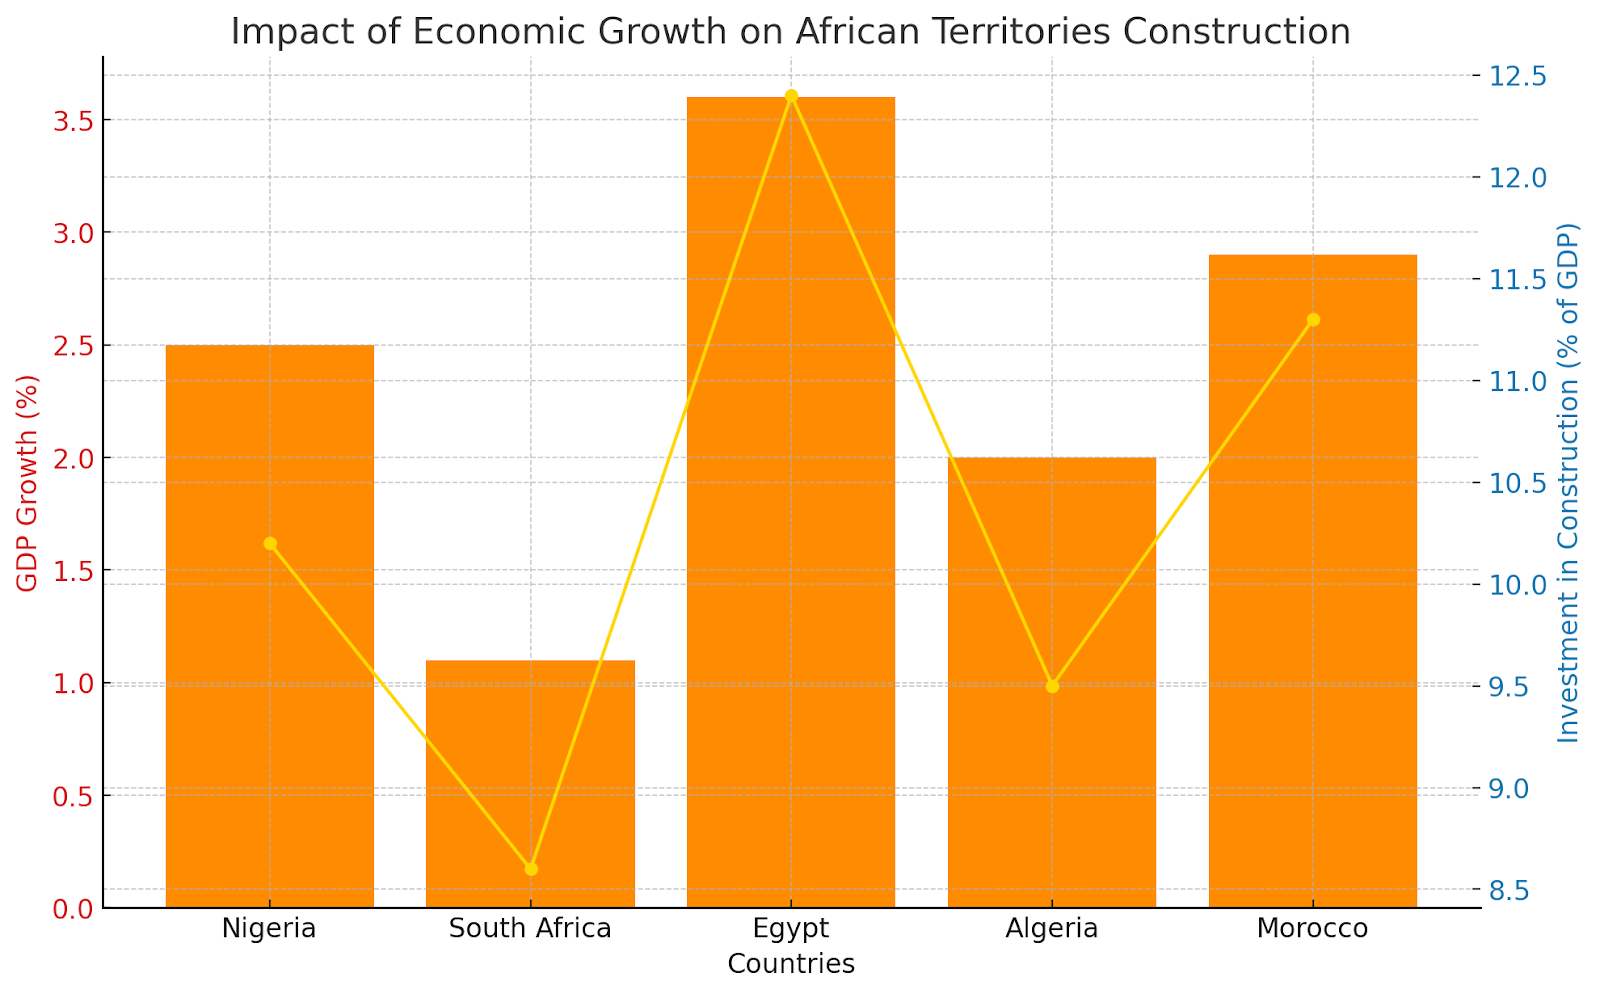 The visualization above showcases the relationship between GDP growth and investment in construction across five key African countries: Nigeria, South Africa, Egypt, Algeria, and Morocco. It highlights how economic growth, indicated by GDP growth rates, correlates with investments in construction as a percentage of GDP. This data underscores the significant impact of economic development on the construction and further development of African territories.